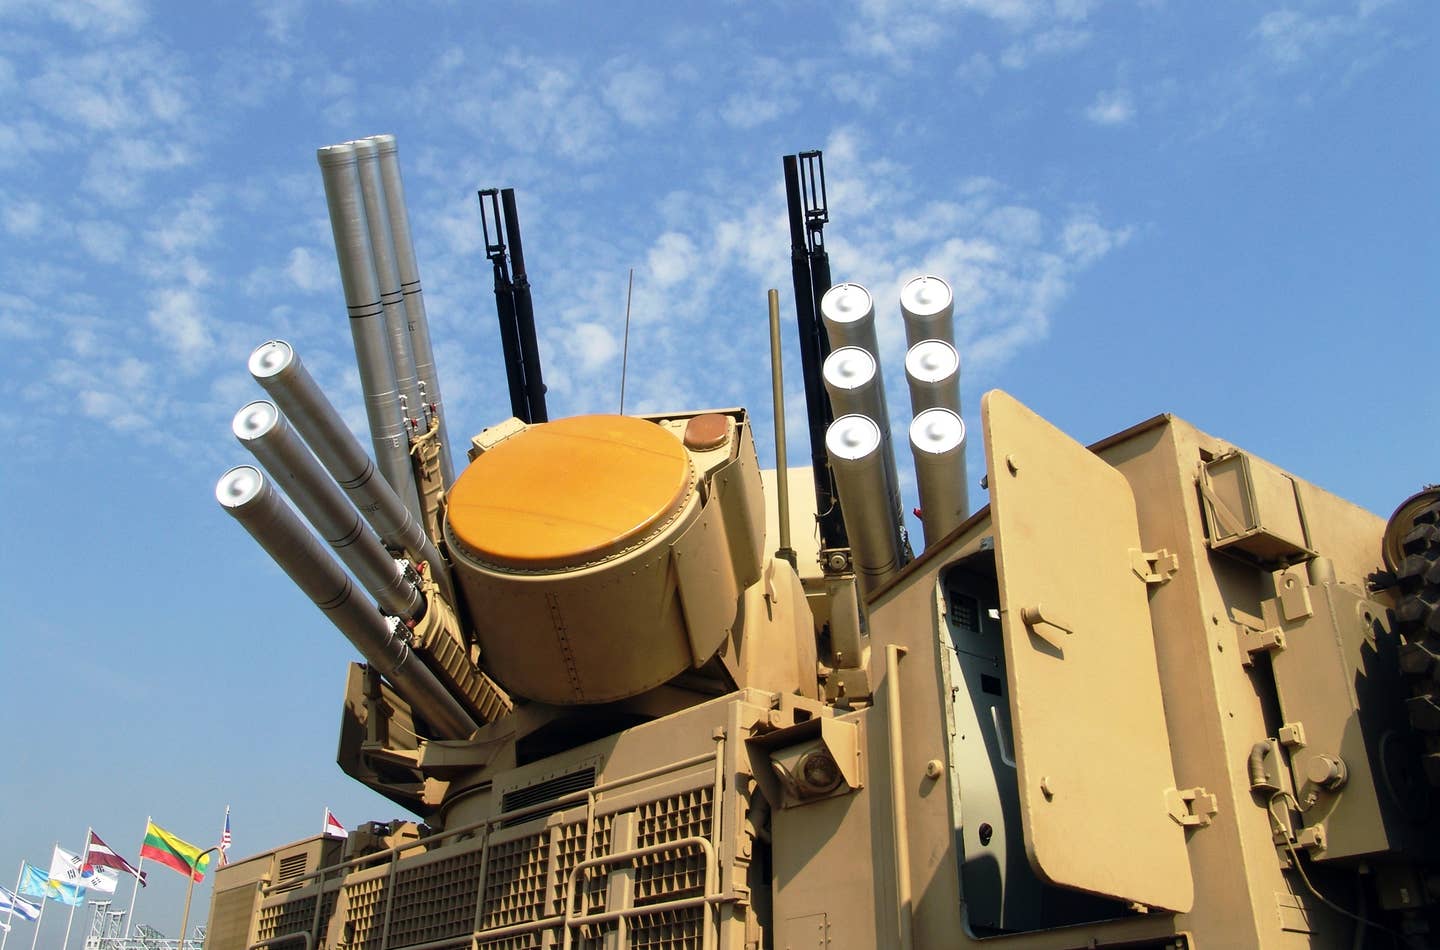 The heart of Pantsir: 12 SA-22 Greyhound missiles and two 30mm cannon. (Photo form Wikimedia Commons)